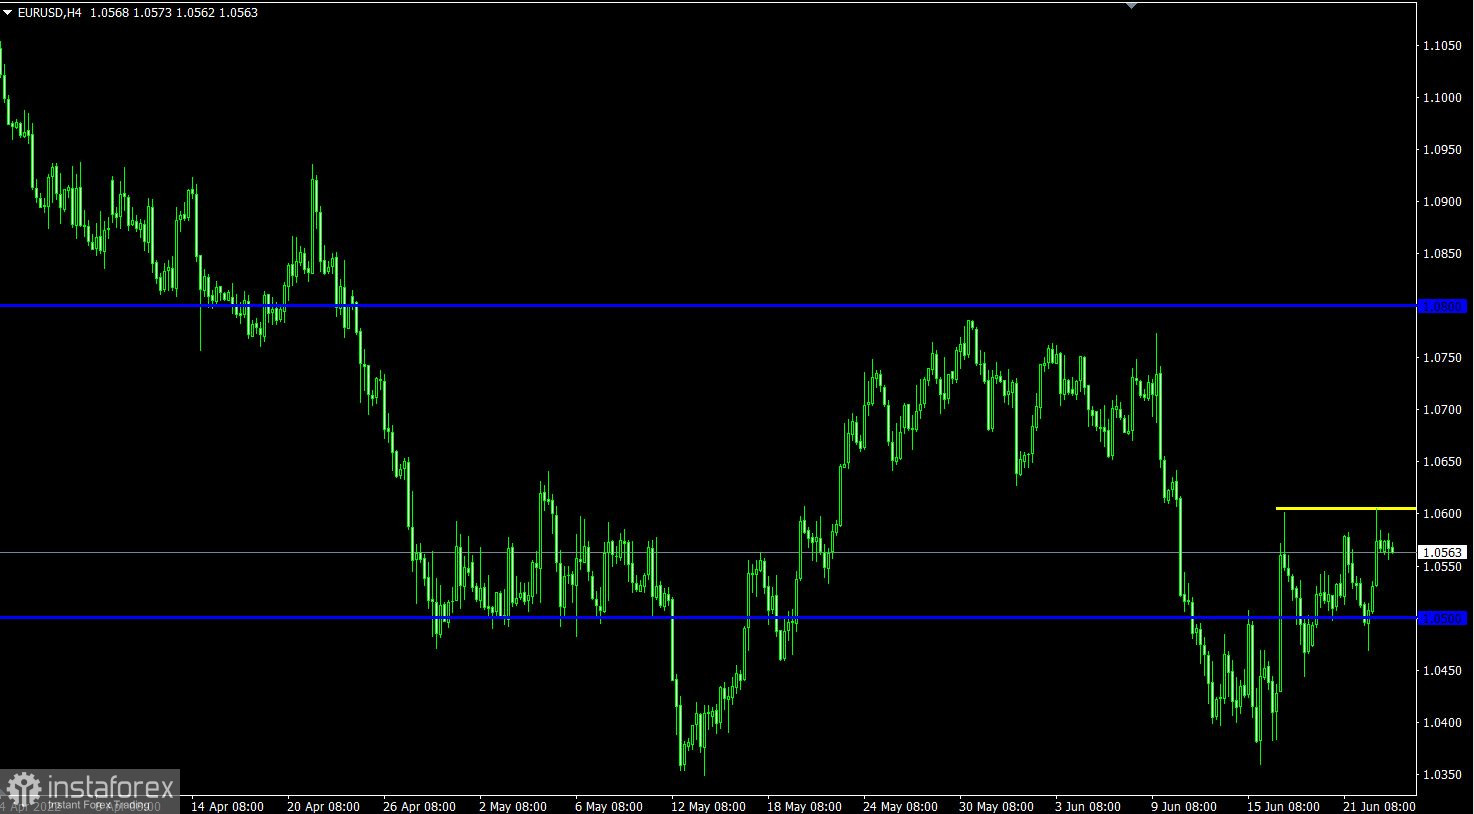 Trading plan for EUR/USD and GBP/USD on June 23, 2022